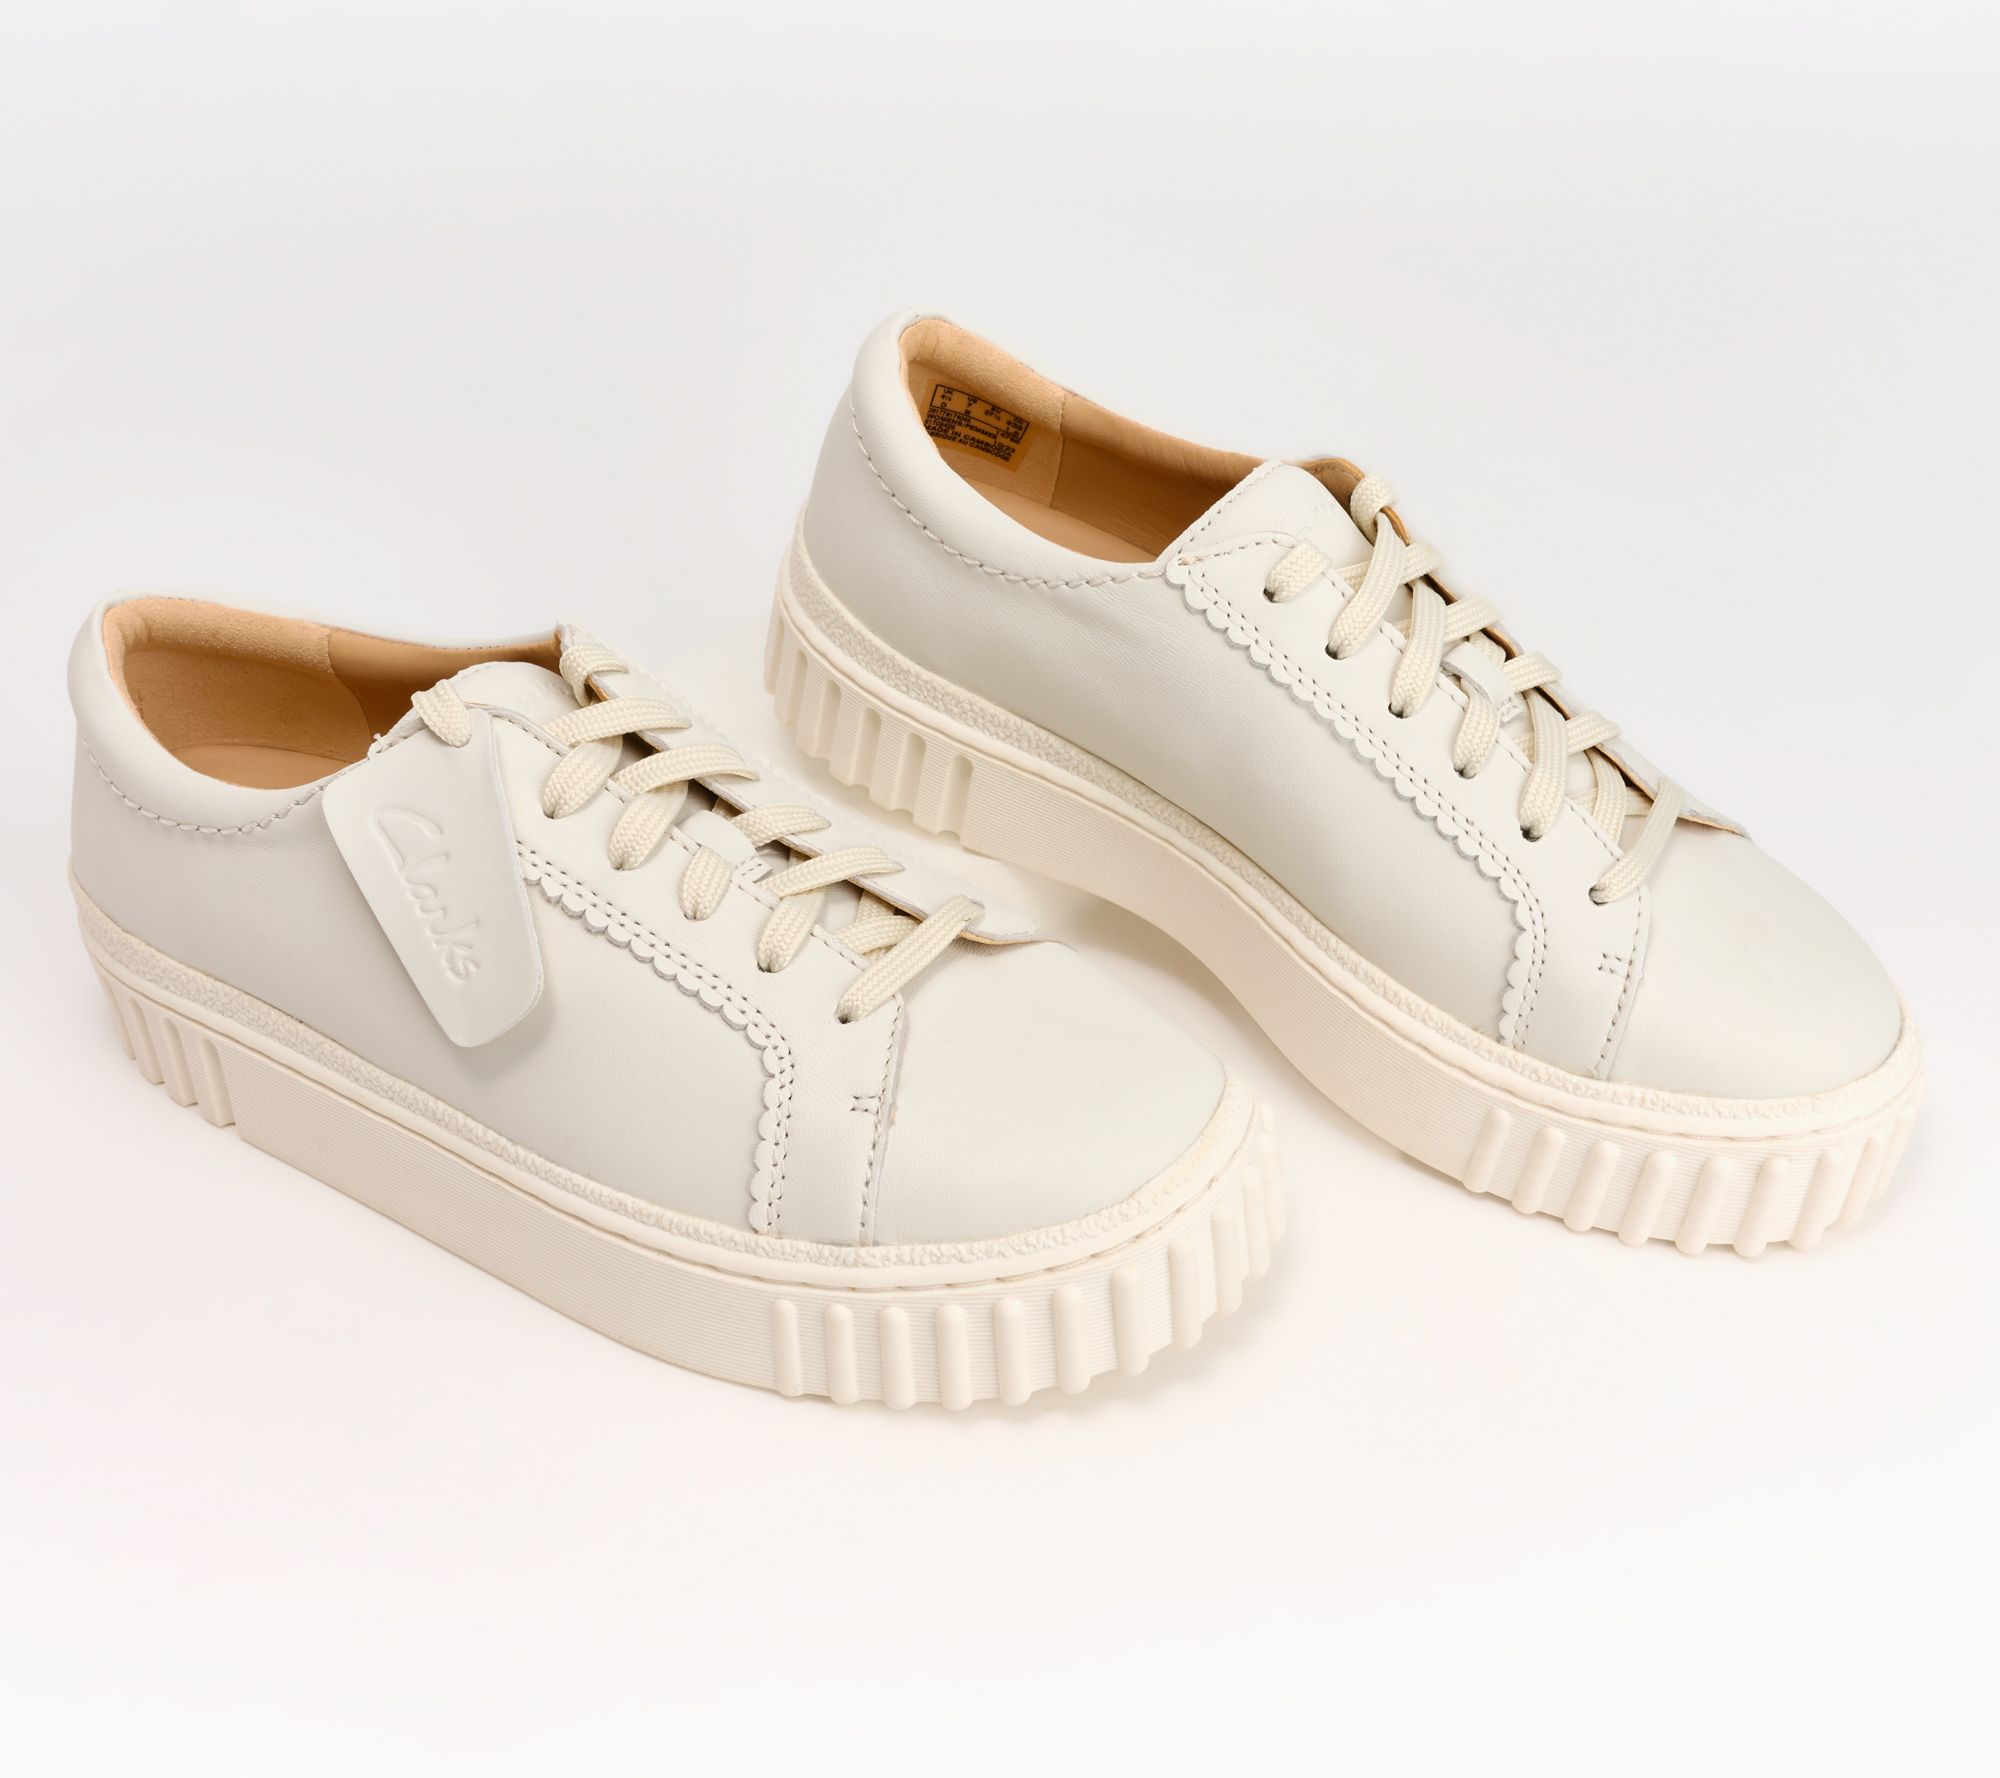 Clarks Signature Leather Sneakers- Mayhill Walk - QVC.com